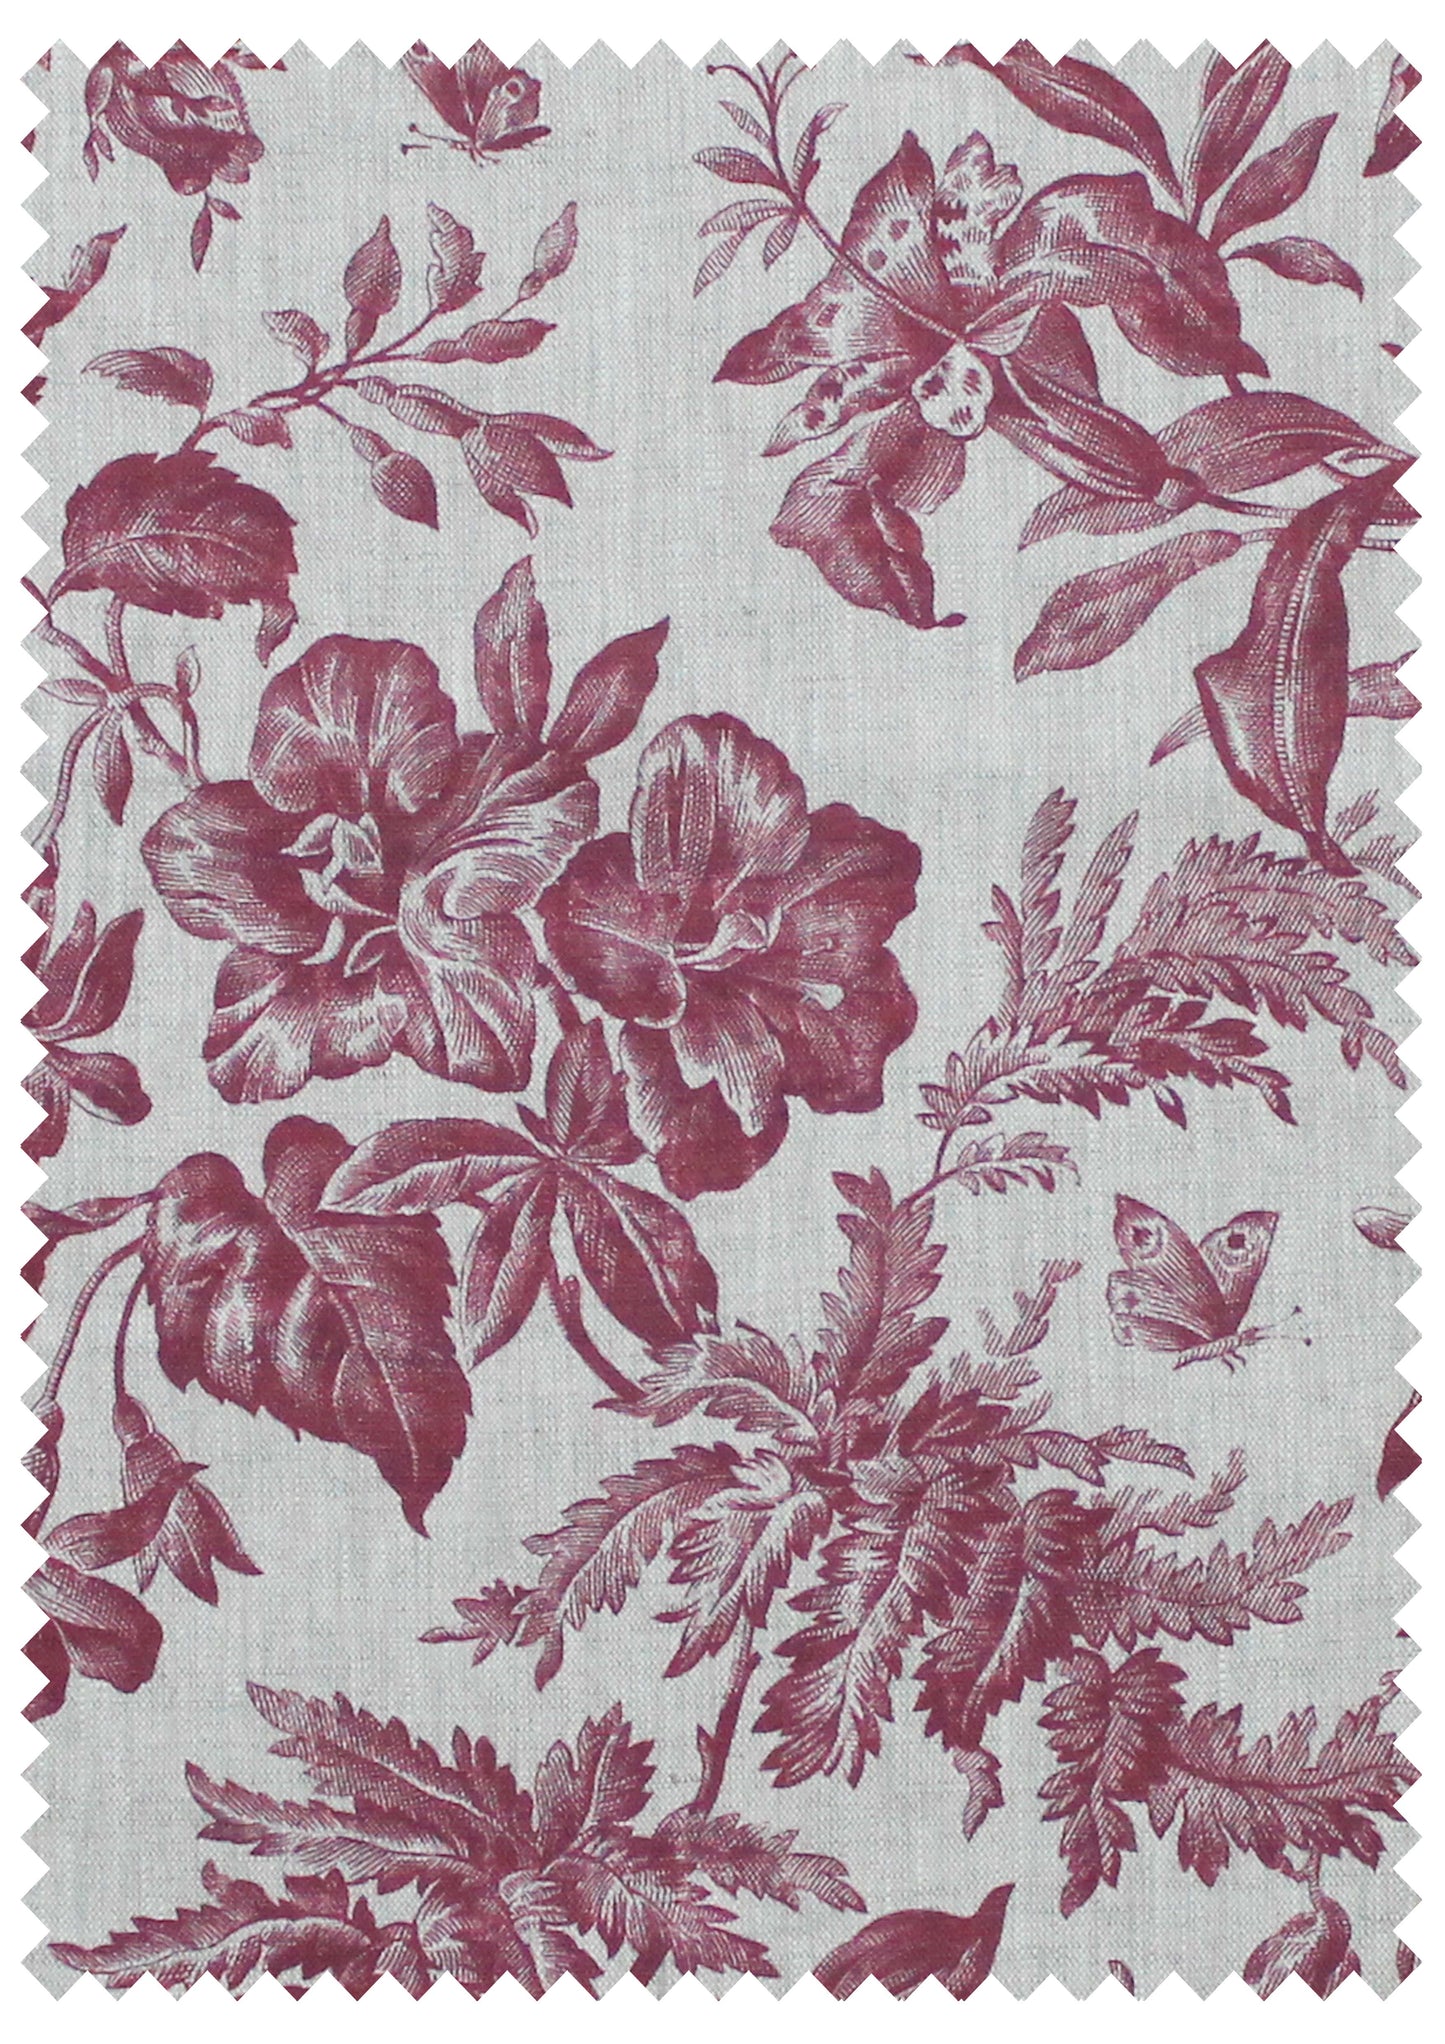 Floraison French Raspberry - Natural Linen Swatch